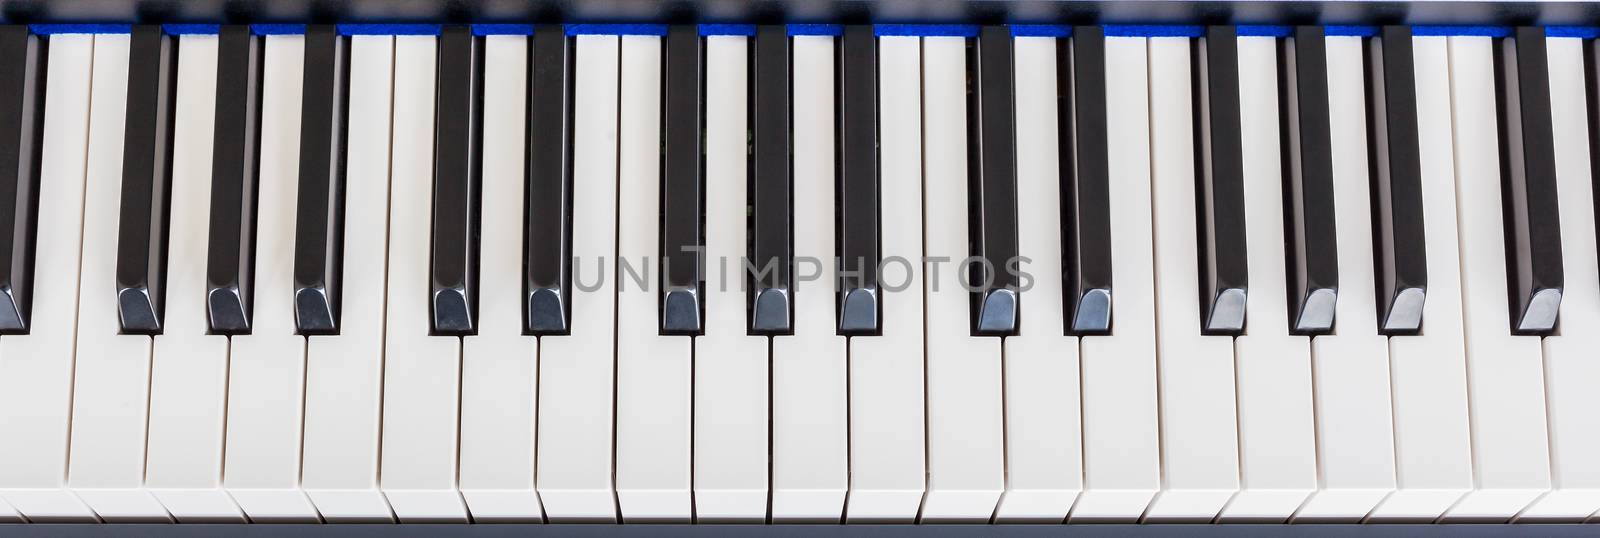 Piano Keyboard synthesizer closeup key top view by FrameAngel